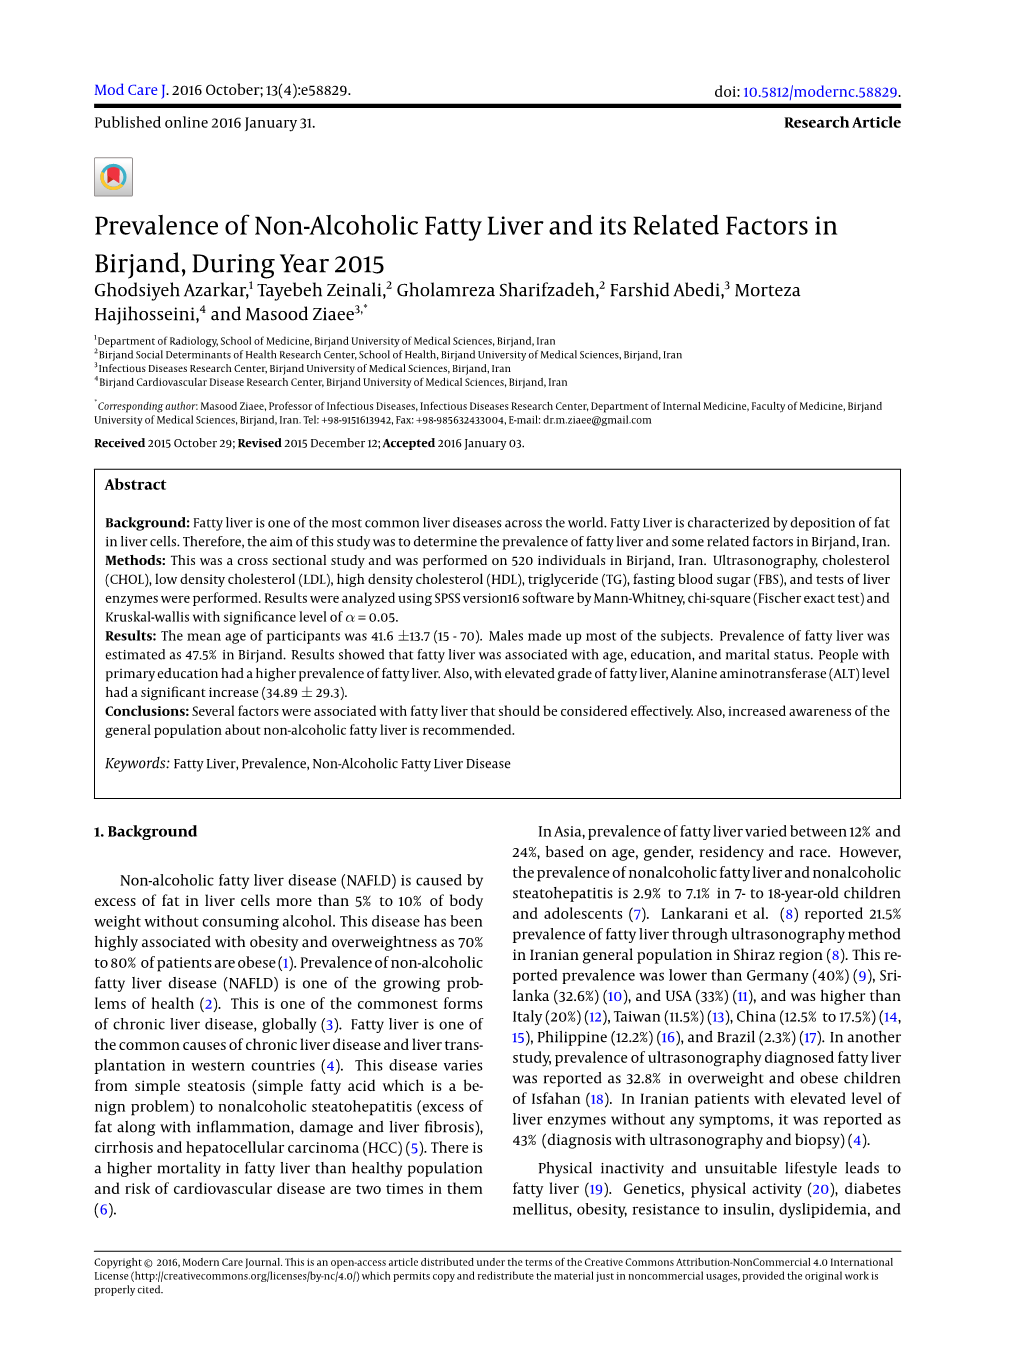 Prevalence of Non-Alcoholic Fatty Liver and Its Related Factors In